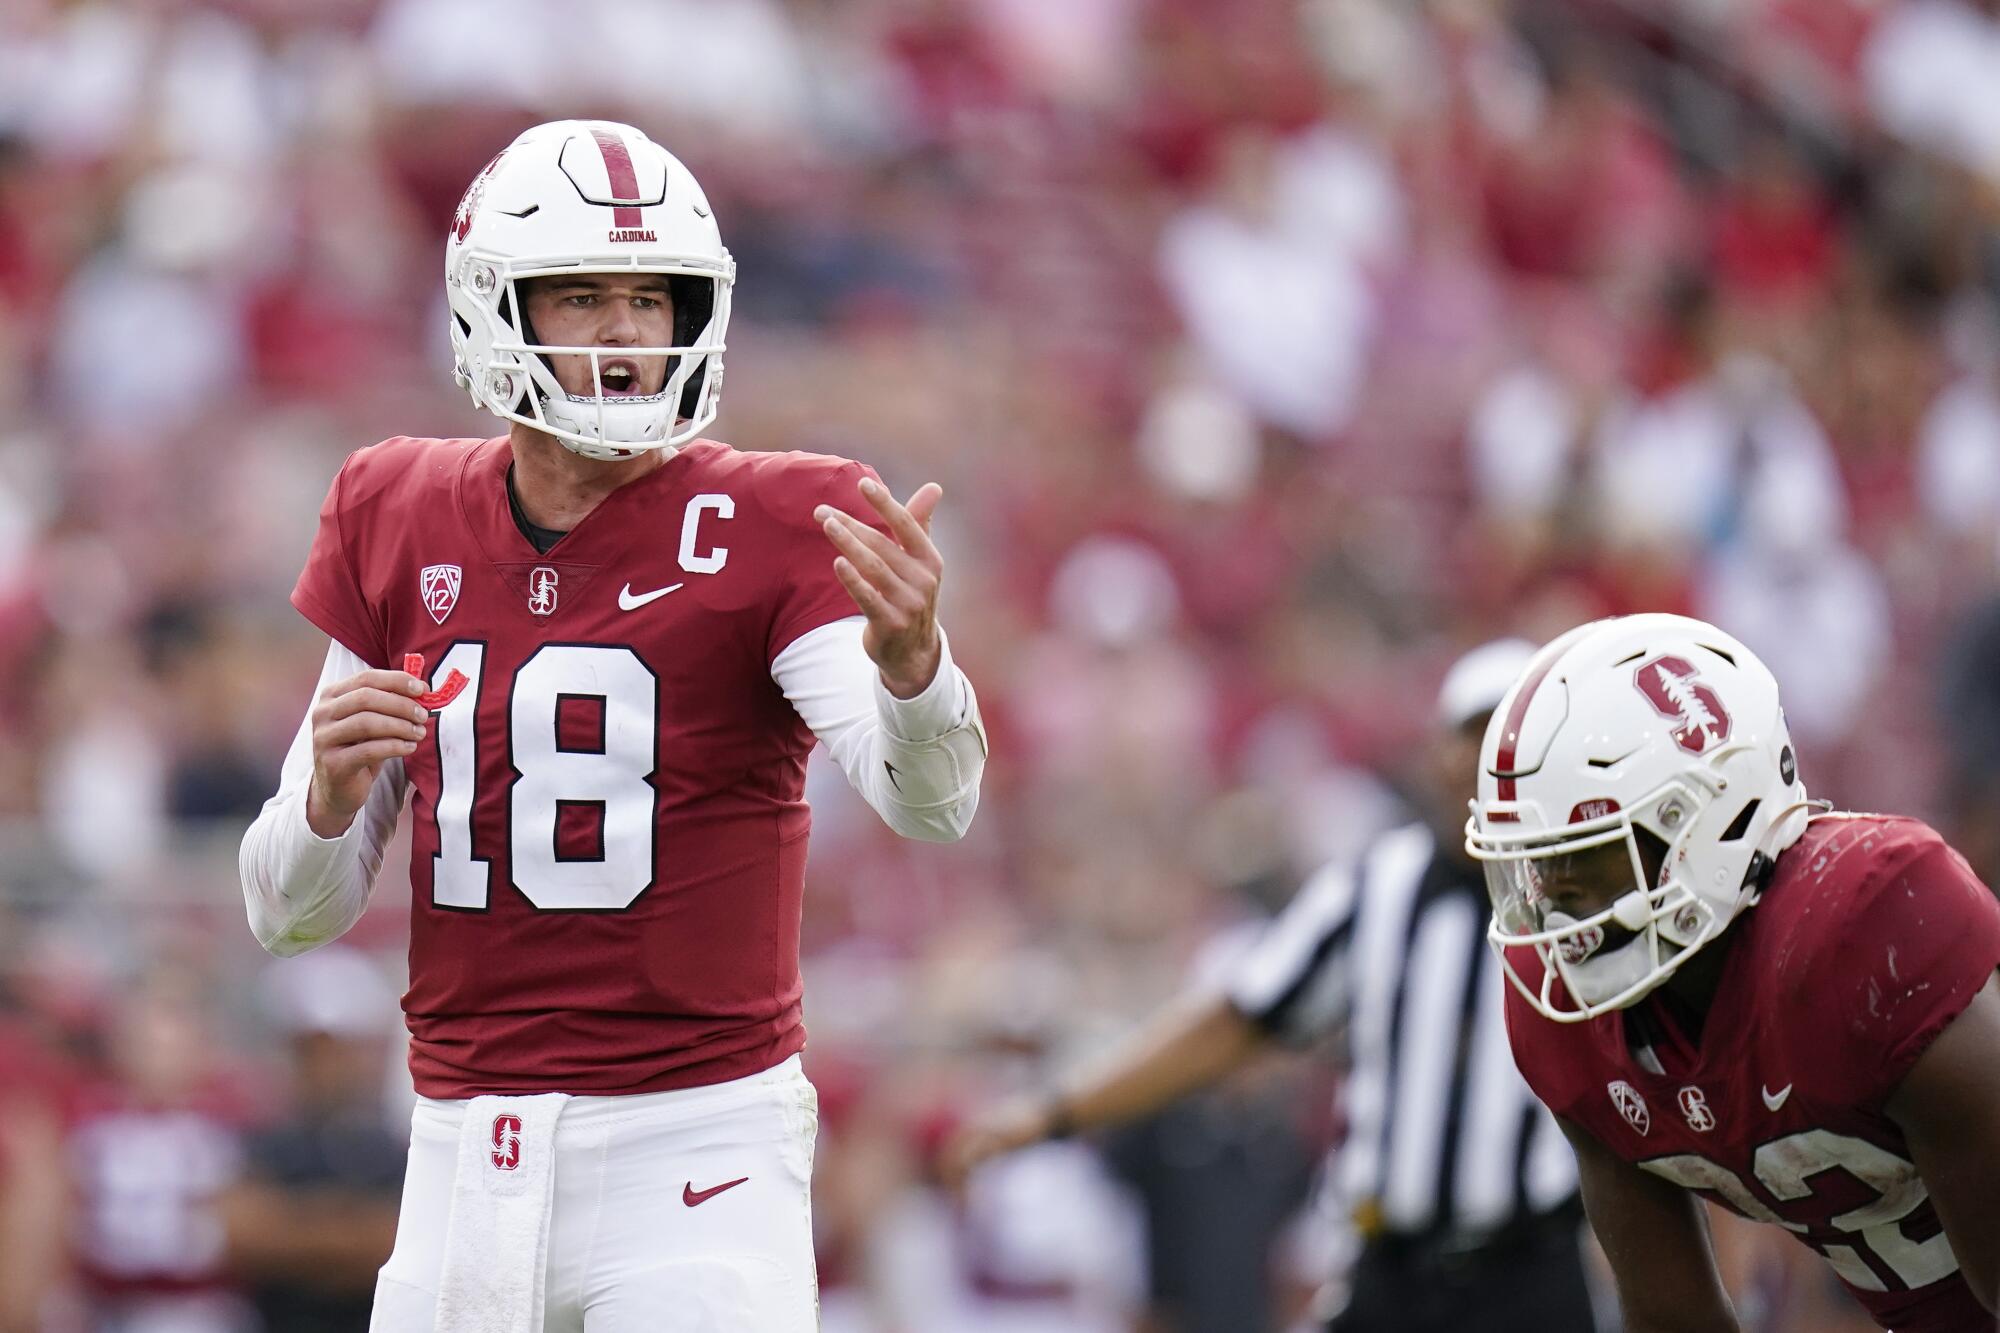 Stanford quarterback Tanner McKee signals to a teammate before snapping the ball against USC in 2022.